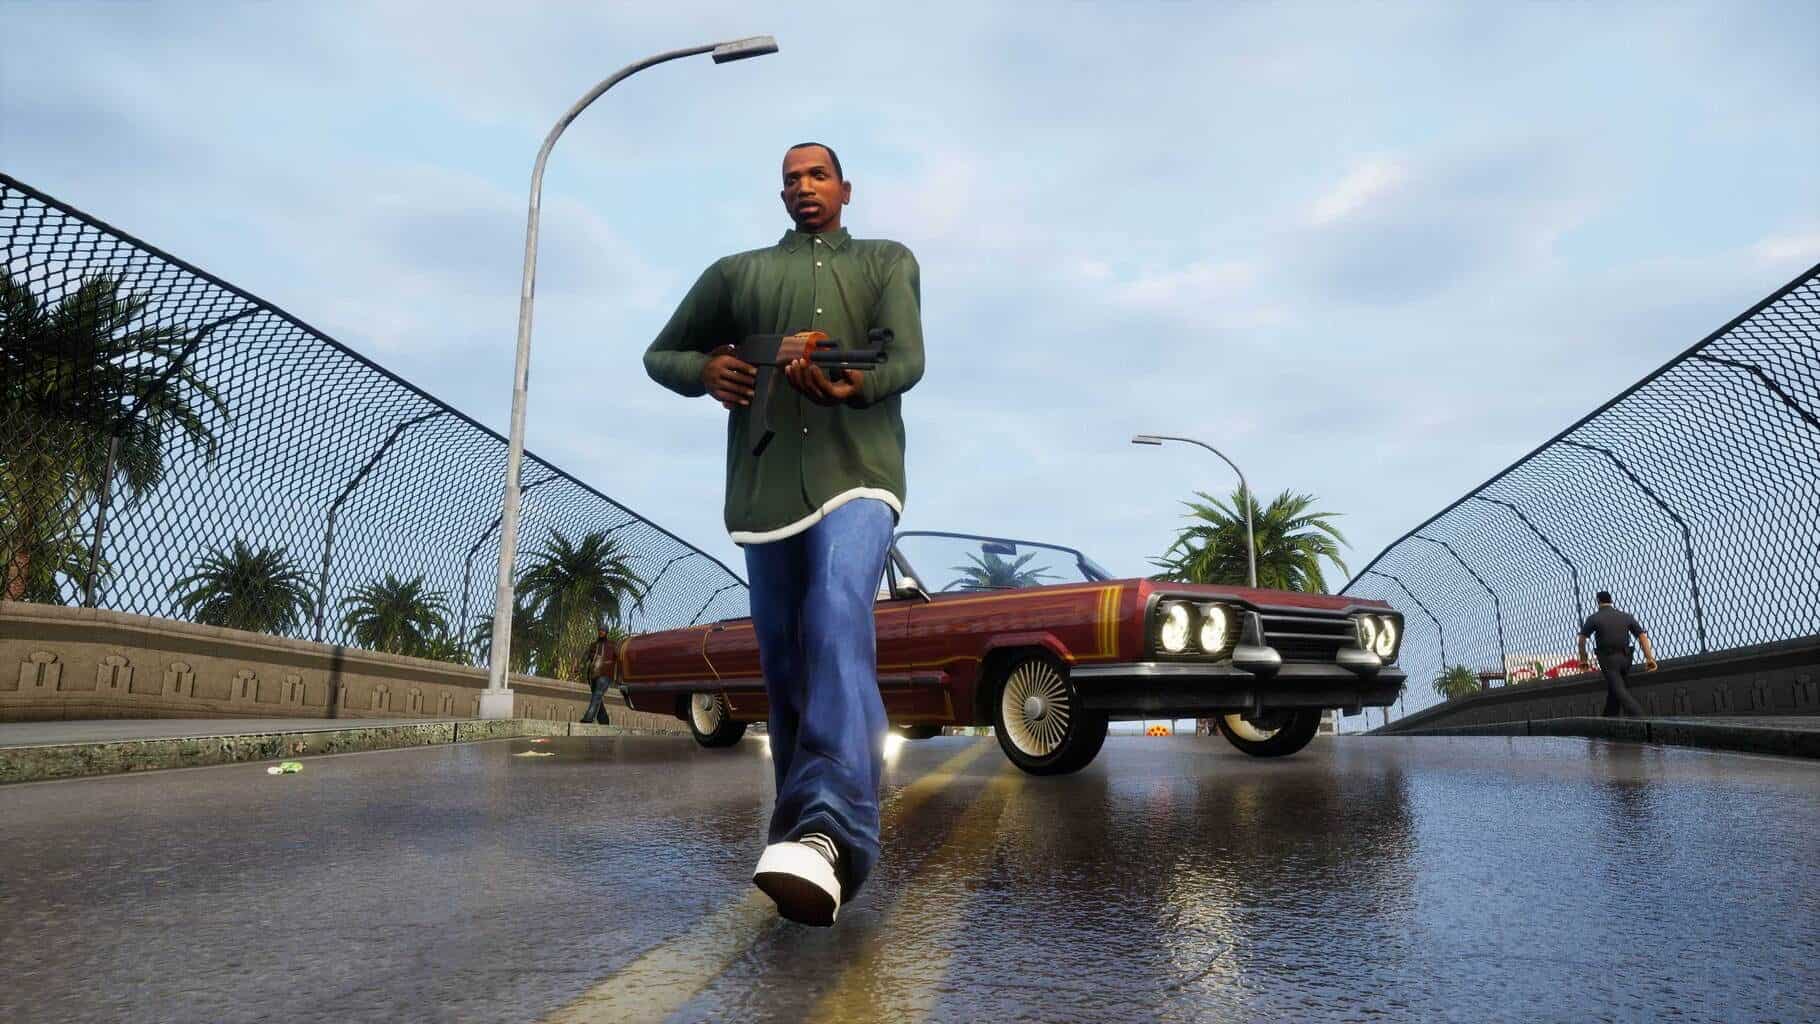 GTA San Andreas 2 Player Deluxe: What gamers should know about